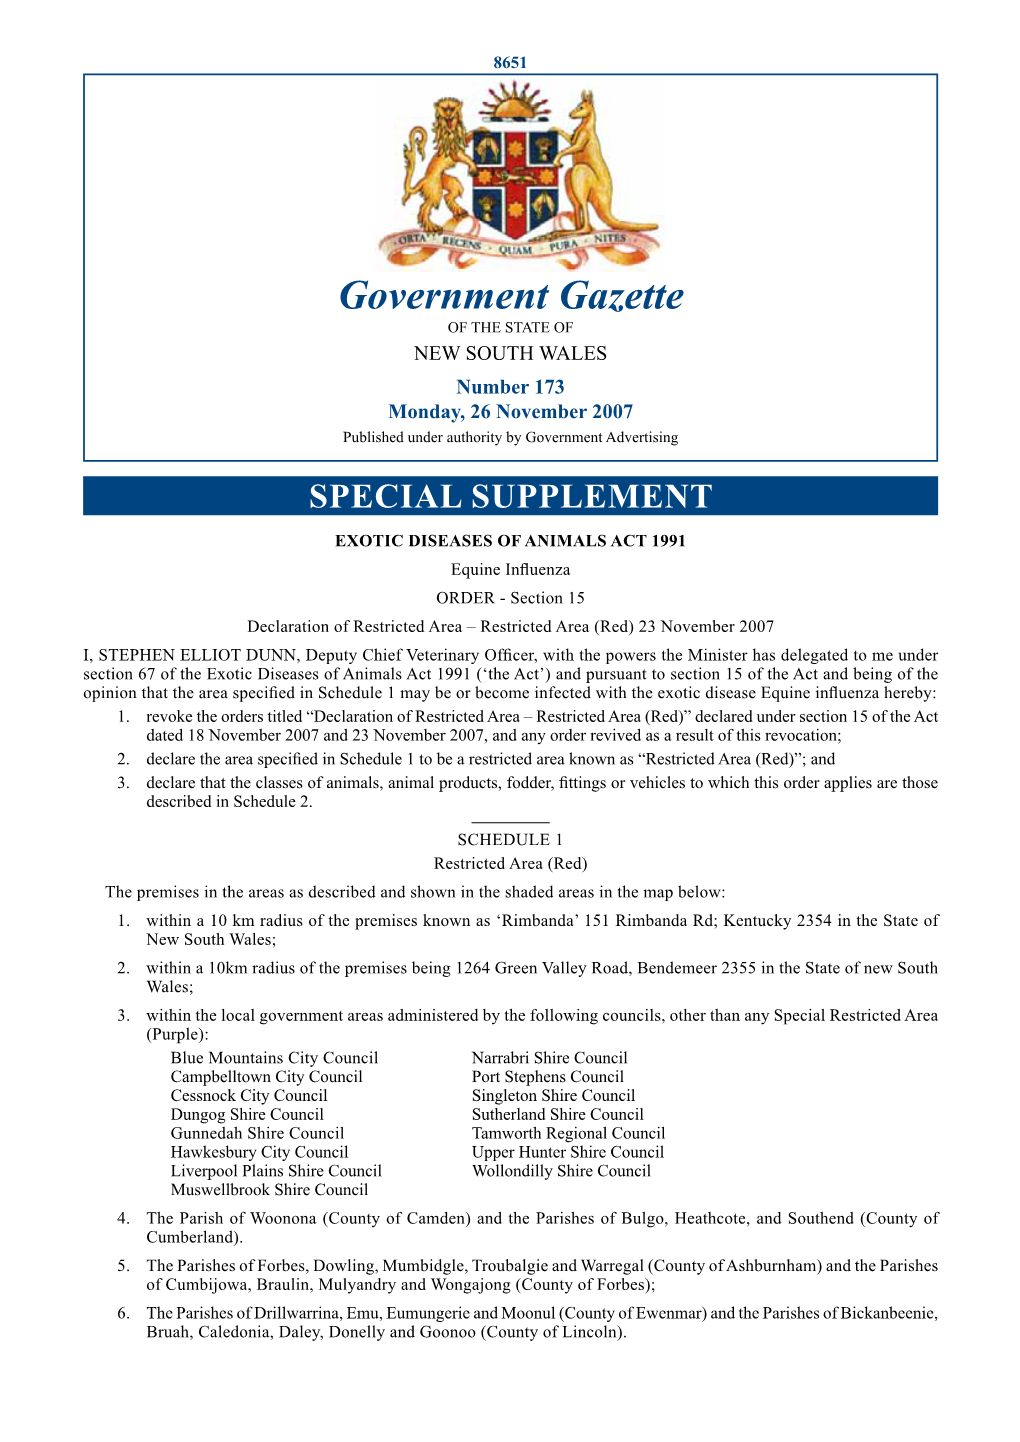 Government Gazette of the STATE of NEW SOUTH WALES Number 173 Monday, 26 November 2007 Published Under Authority by Government Advertising